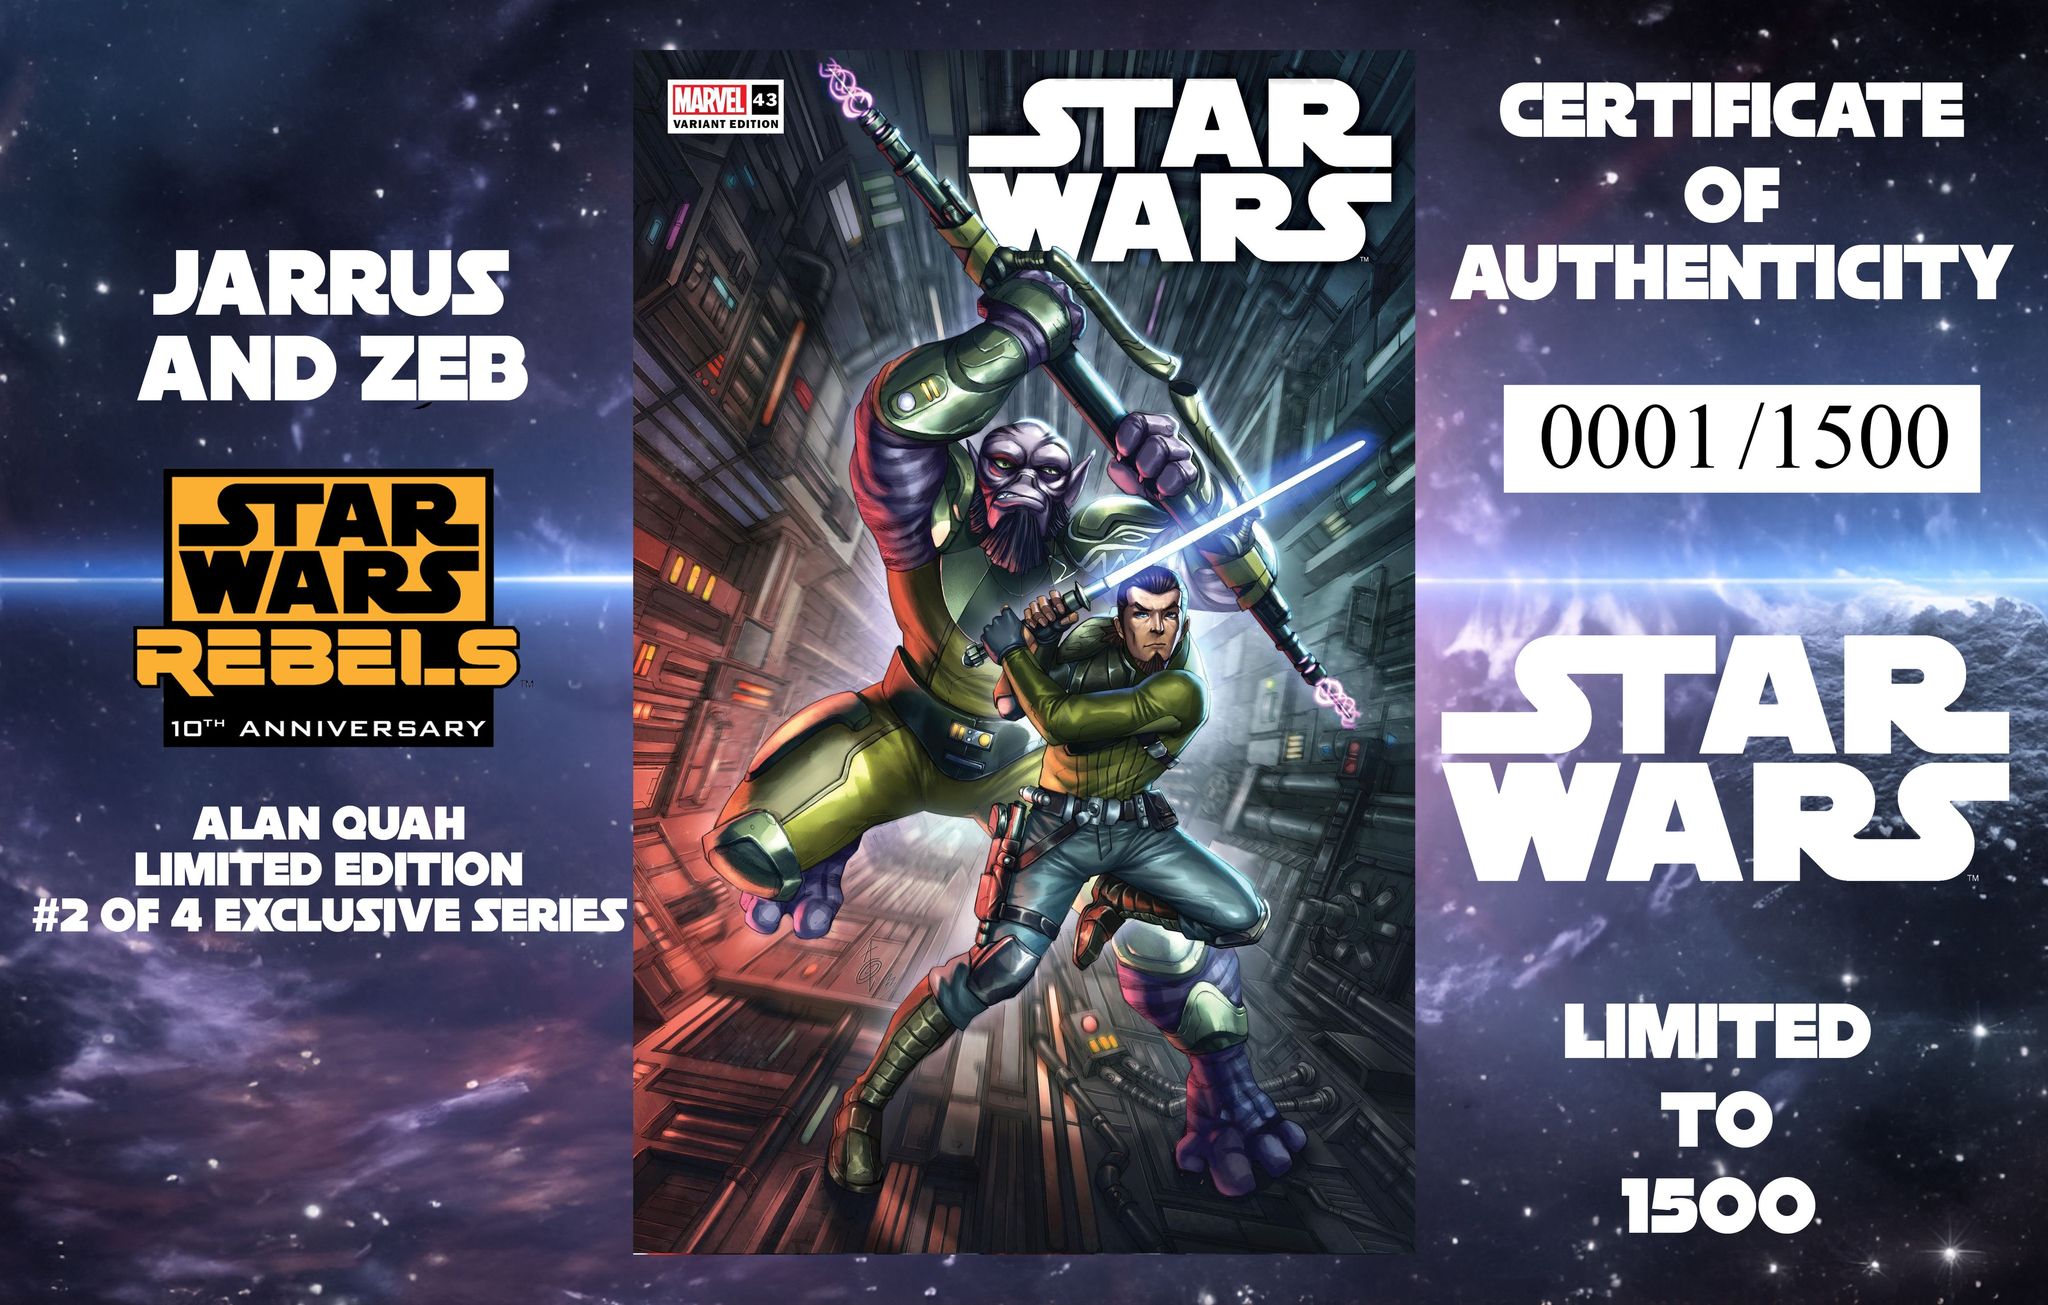 STAR WARS 43 ALAN QUAH REBELS 10TH ANNIVERSARY LIMITED EDITION #2 OF 4 EXCLUSIVE SERIES OPTIONS 02/21/24